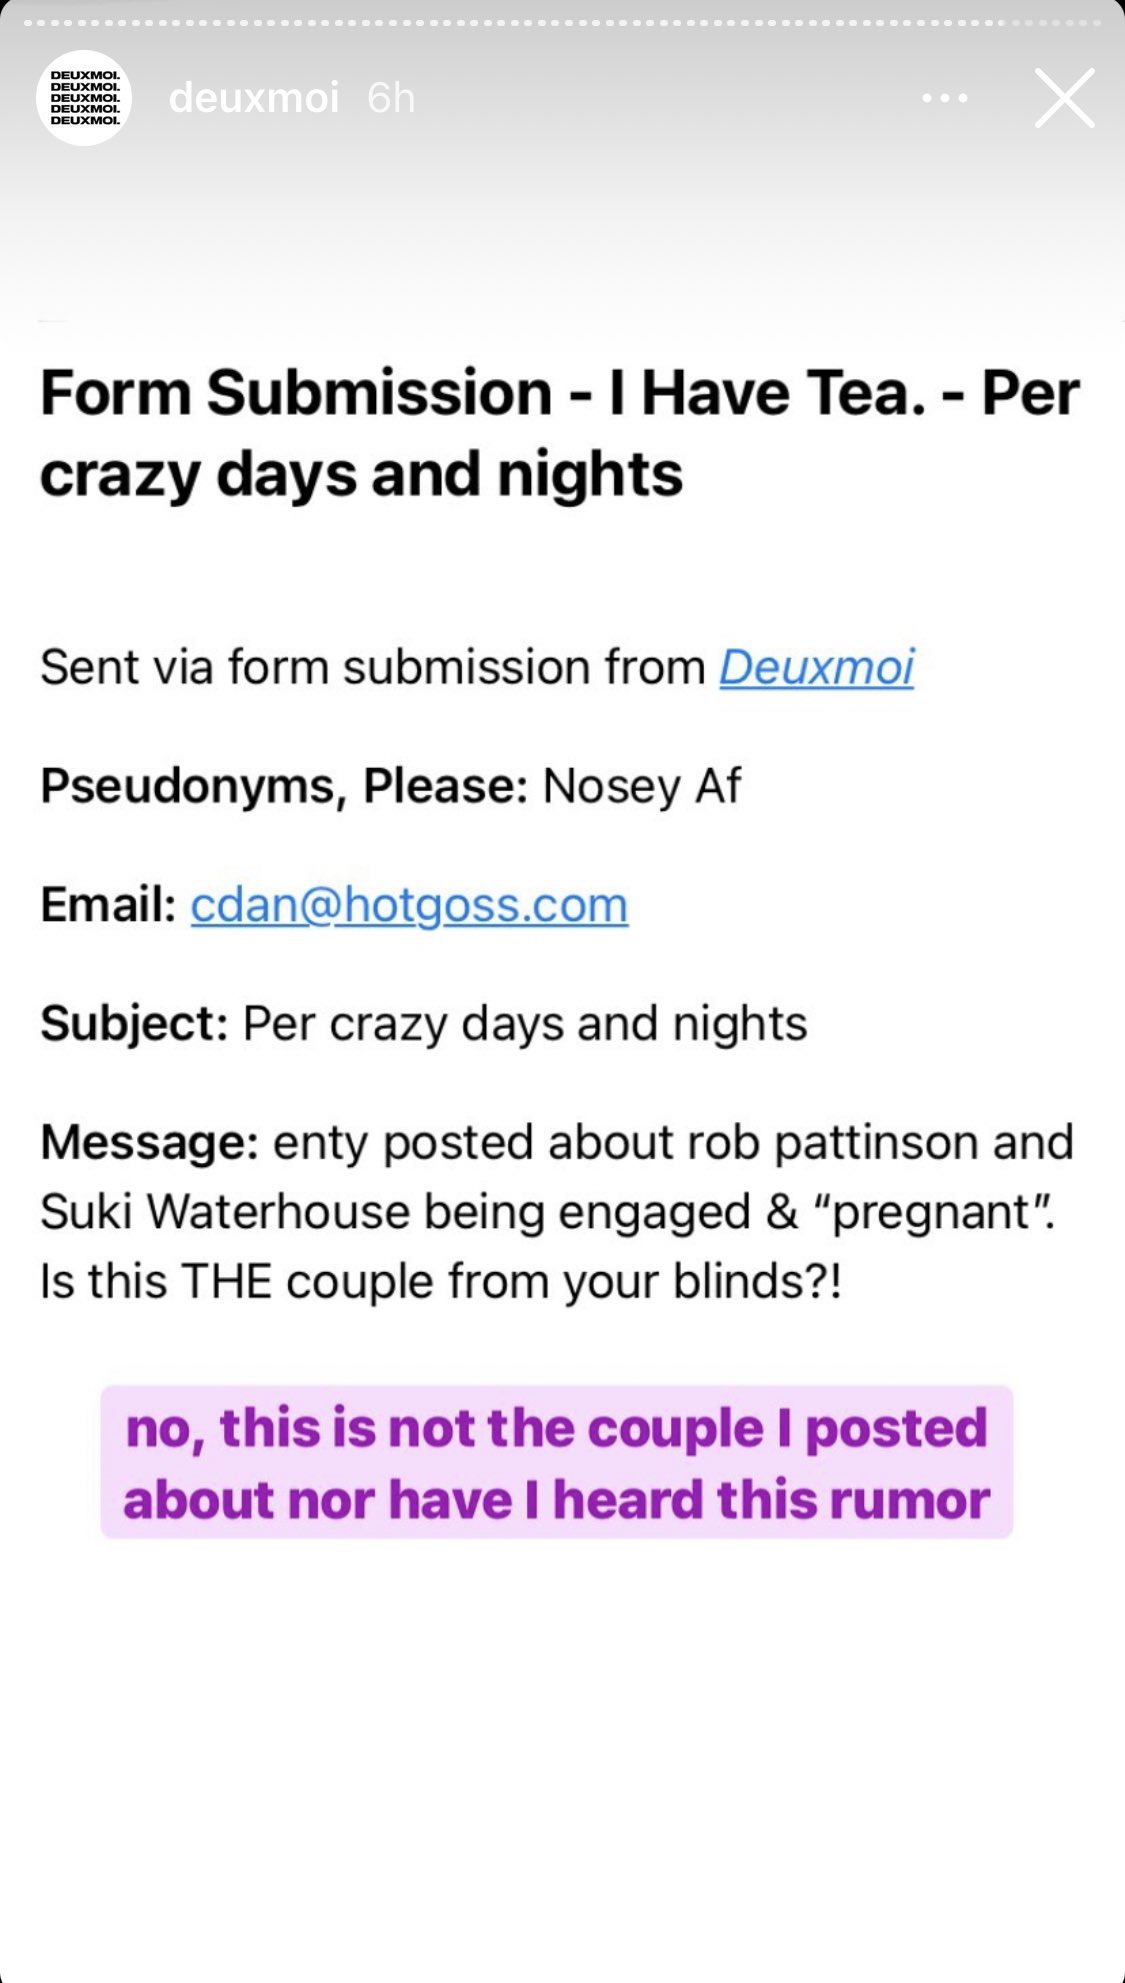 Fakeuser5 on X: Either the sessed are crazier than usual or it's that  desperate user sending this bullshit in herself. She's never been mentioned  on this IG, then she followed them recently